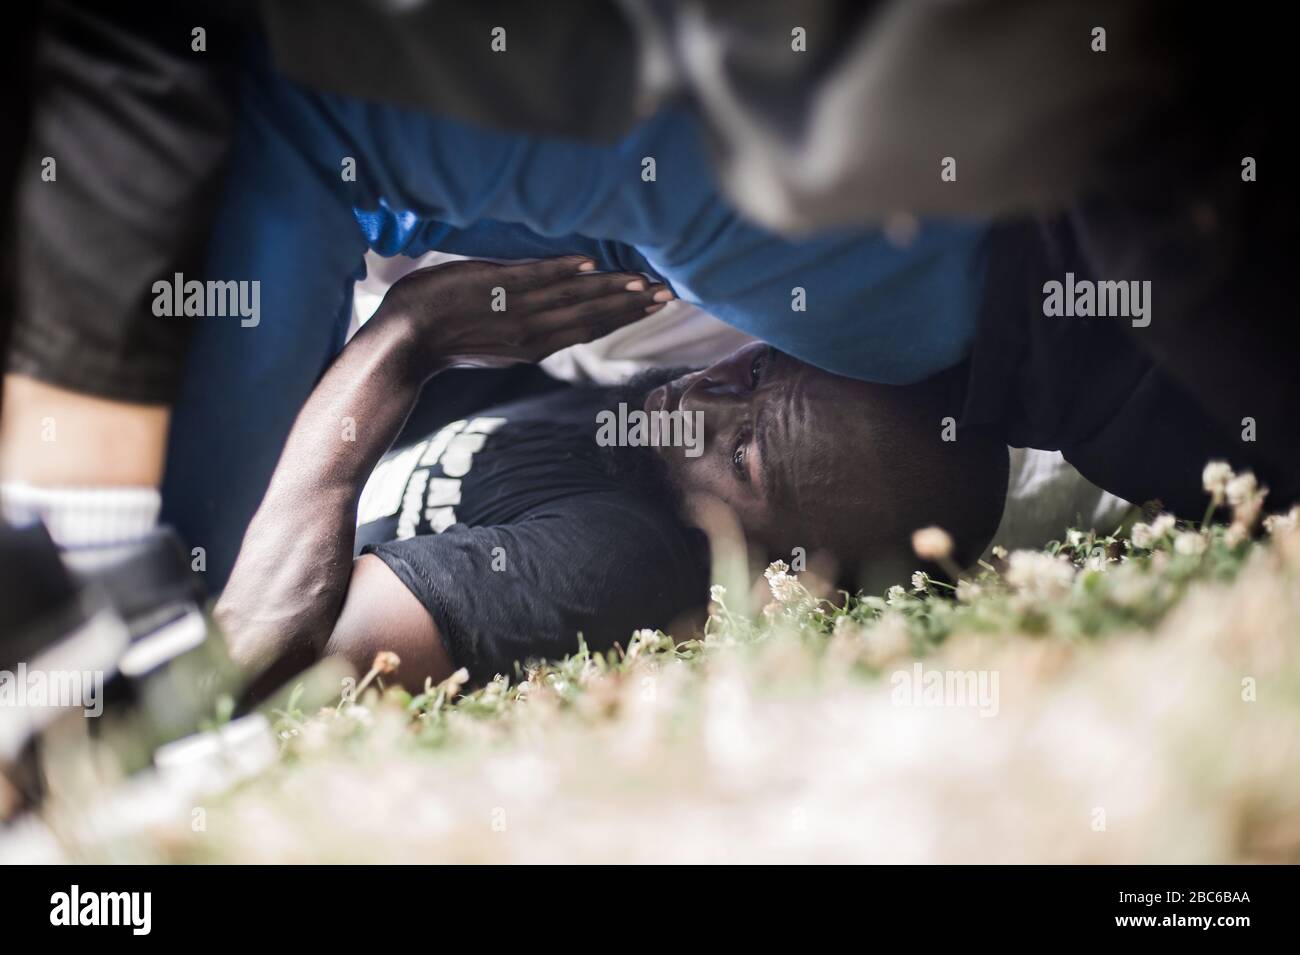 A man crawls across the ground on his back and sneaks under a large group of people, on military type endurance training boot camp, outdoor in nature Stock Photo